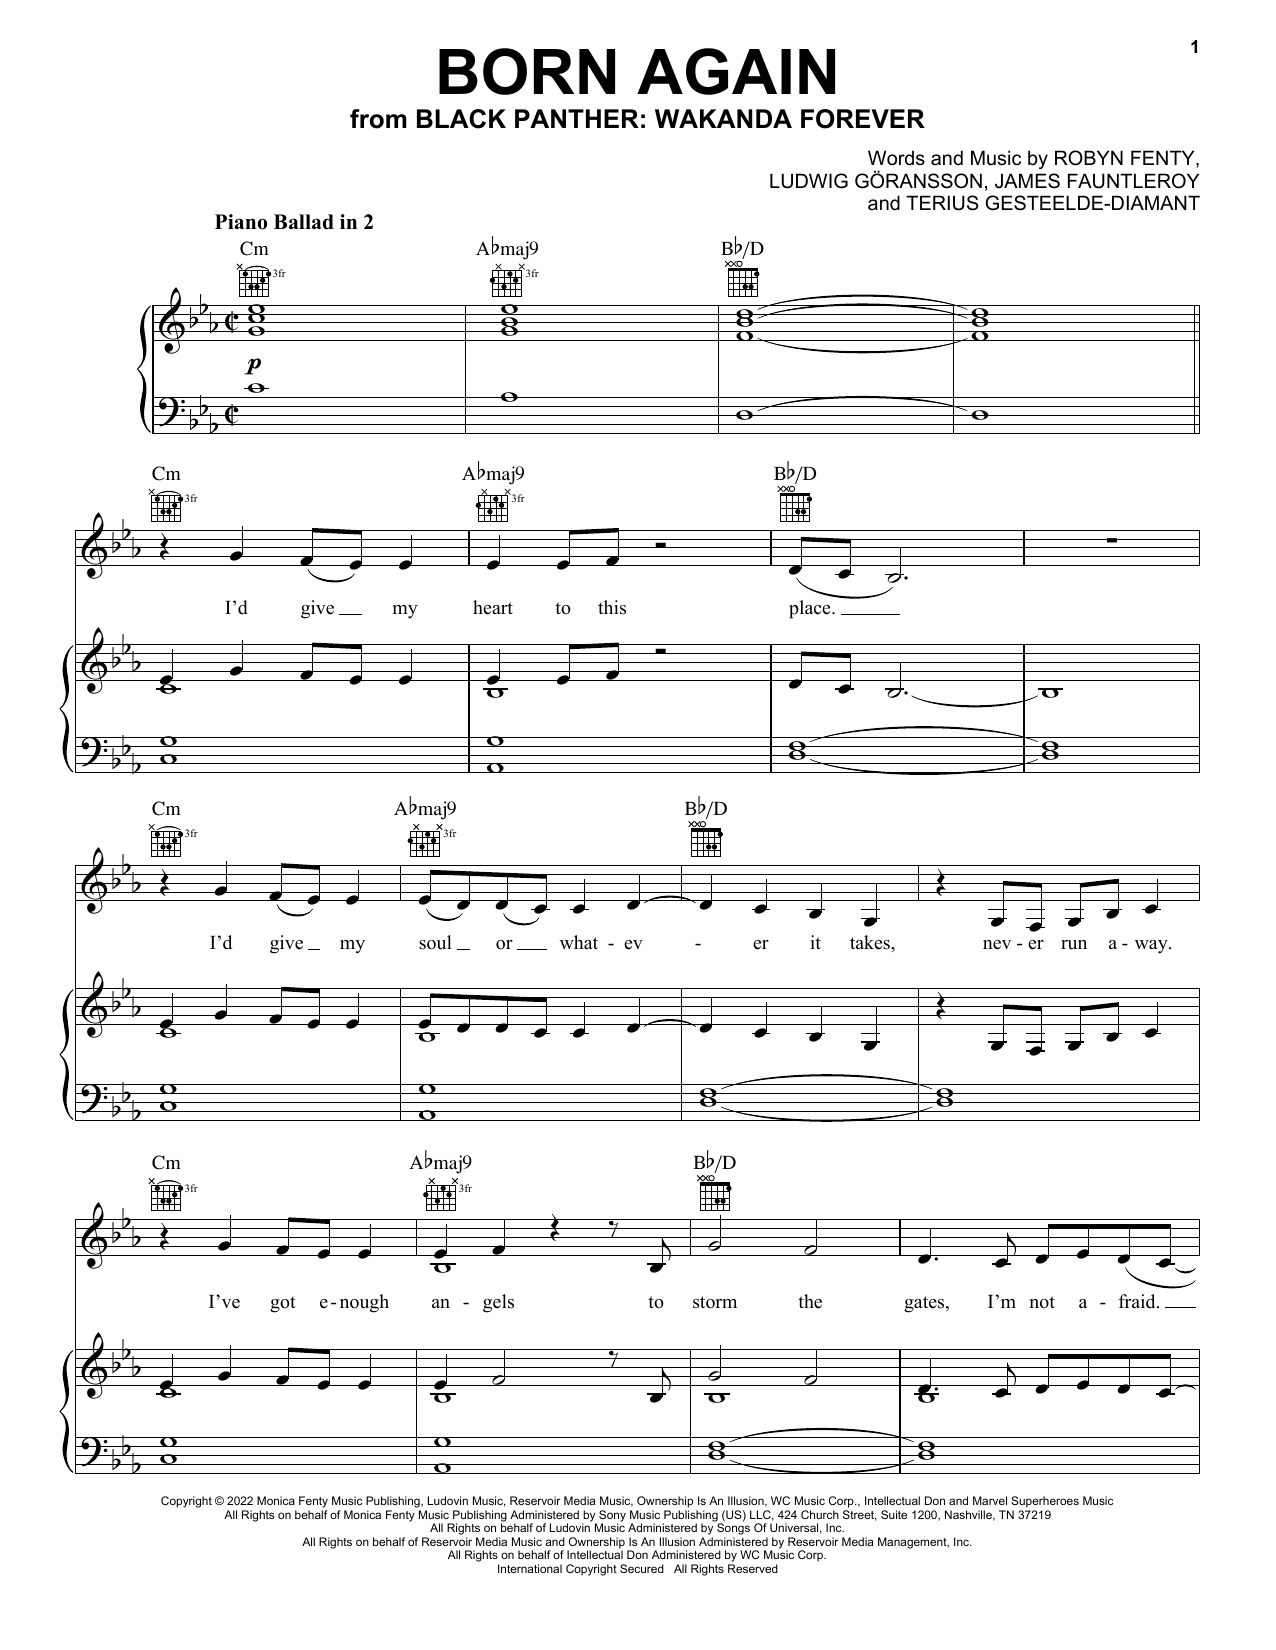 Rihanna Born Again (from Black Panther: Wakanda Forever) sheet music notes and chords. Download Printable PDF.